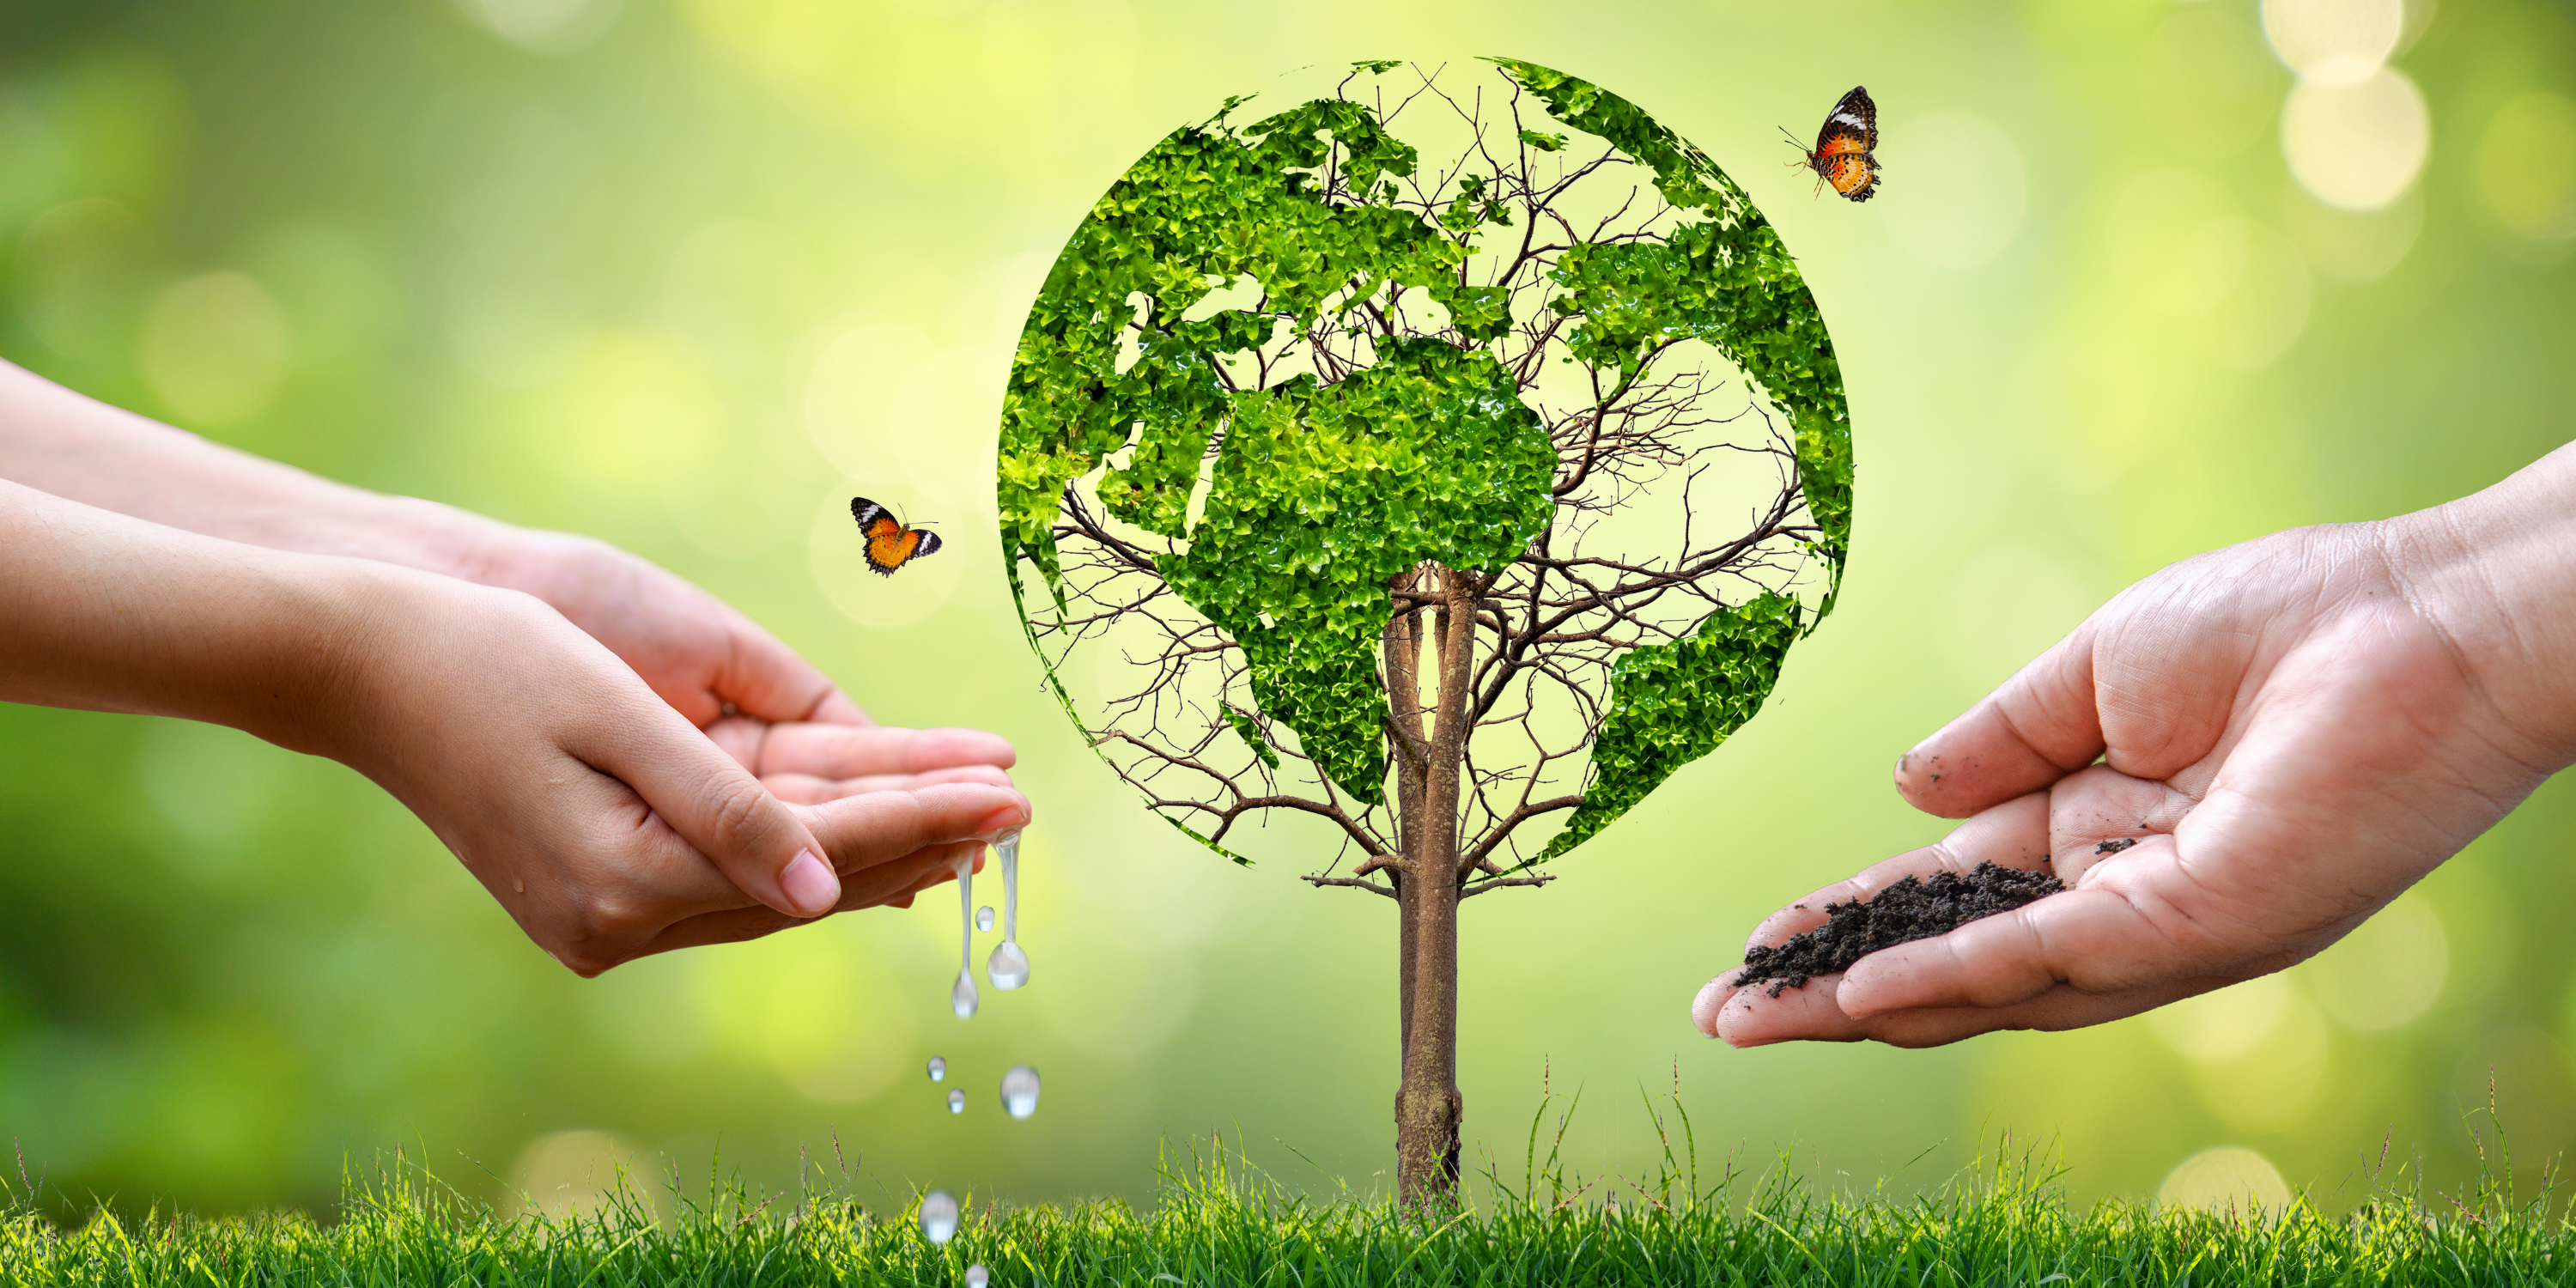 Hands feeding water and earth to tree and butterflies